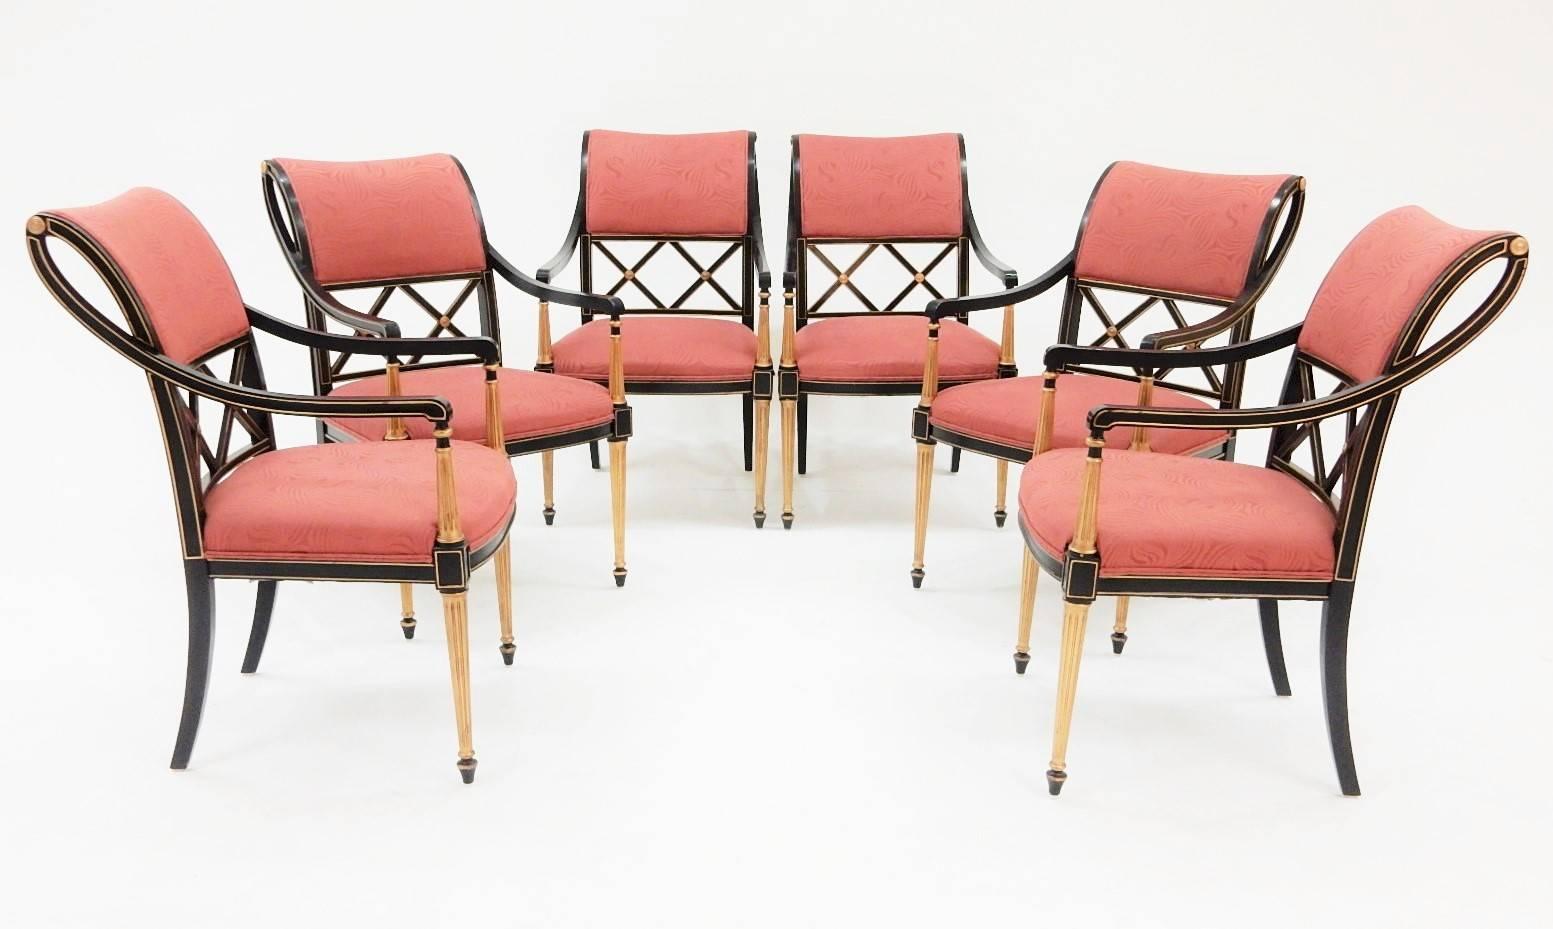 Rare set of 12 dining chairs designed by Dorothy Draper for Henredon Furniture.
Gorgeous sculptural chairs with double X back.
Black lacquer with gilded front legs and highlights.
Original upholstery.
All are structurally excellent with no